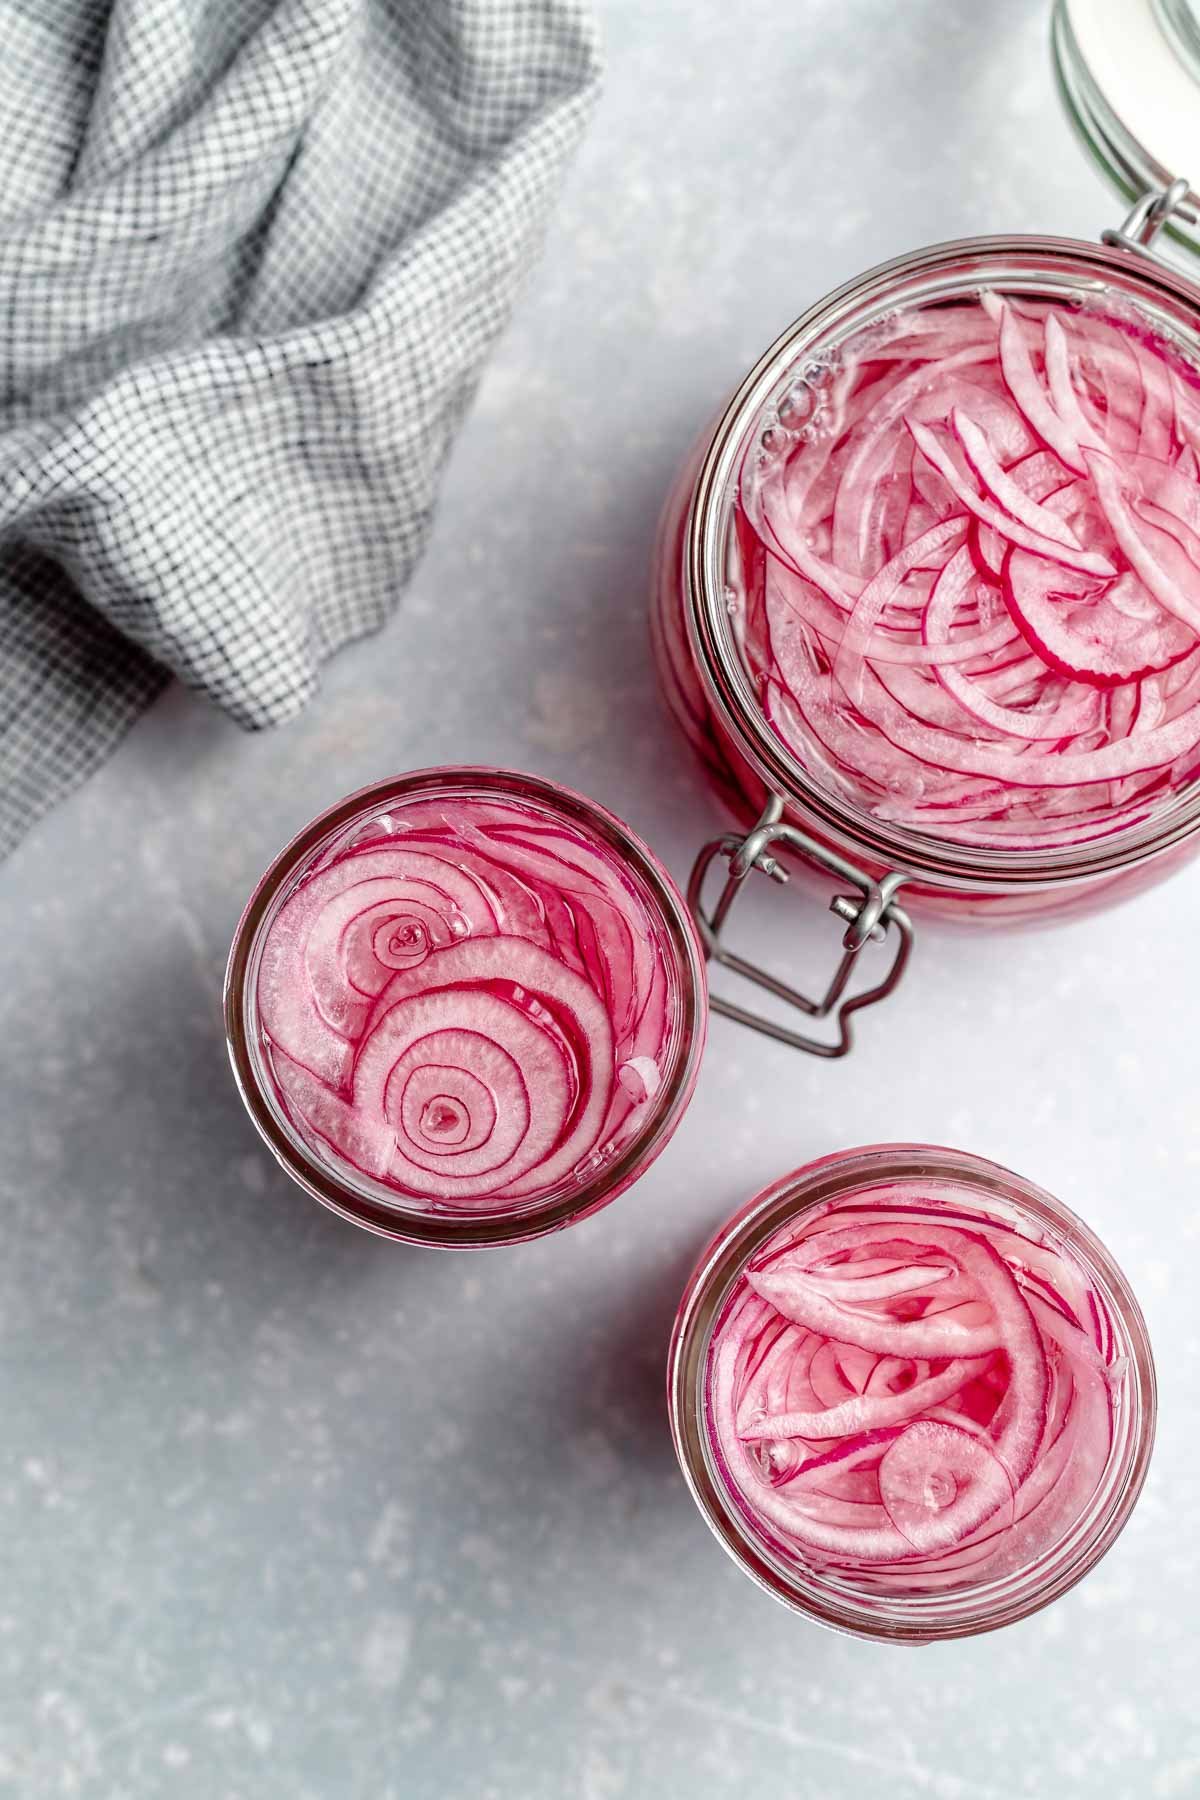 https://playswellwithbutter.com/wp-content/uploads/2020/12/Quick-Pickled-Red-Onions-9.jpg